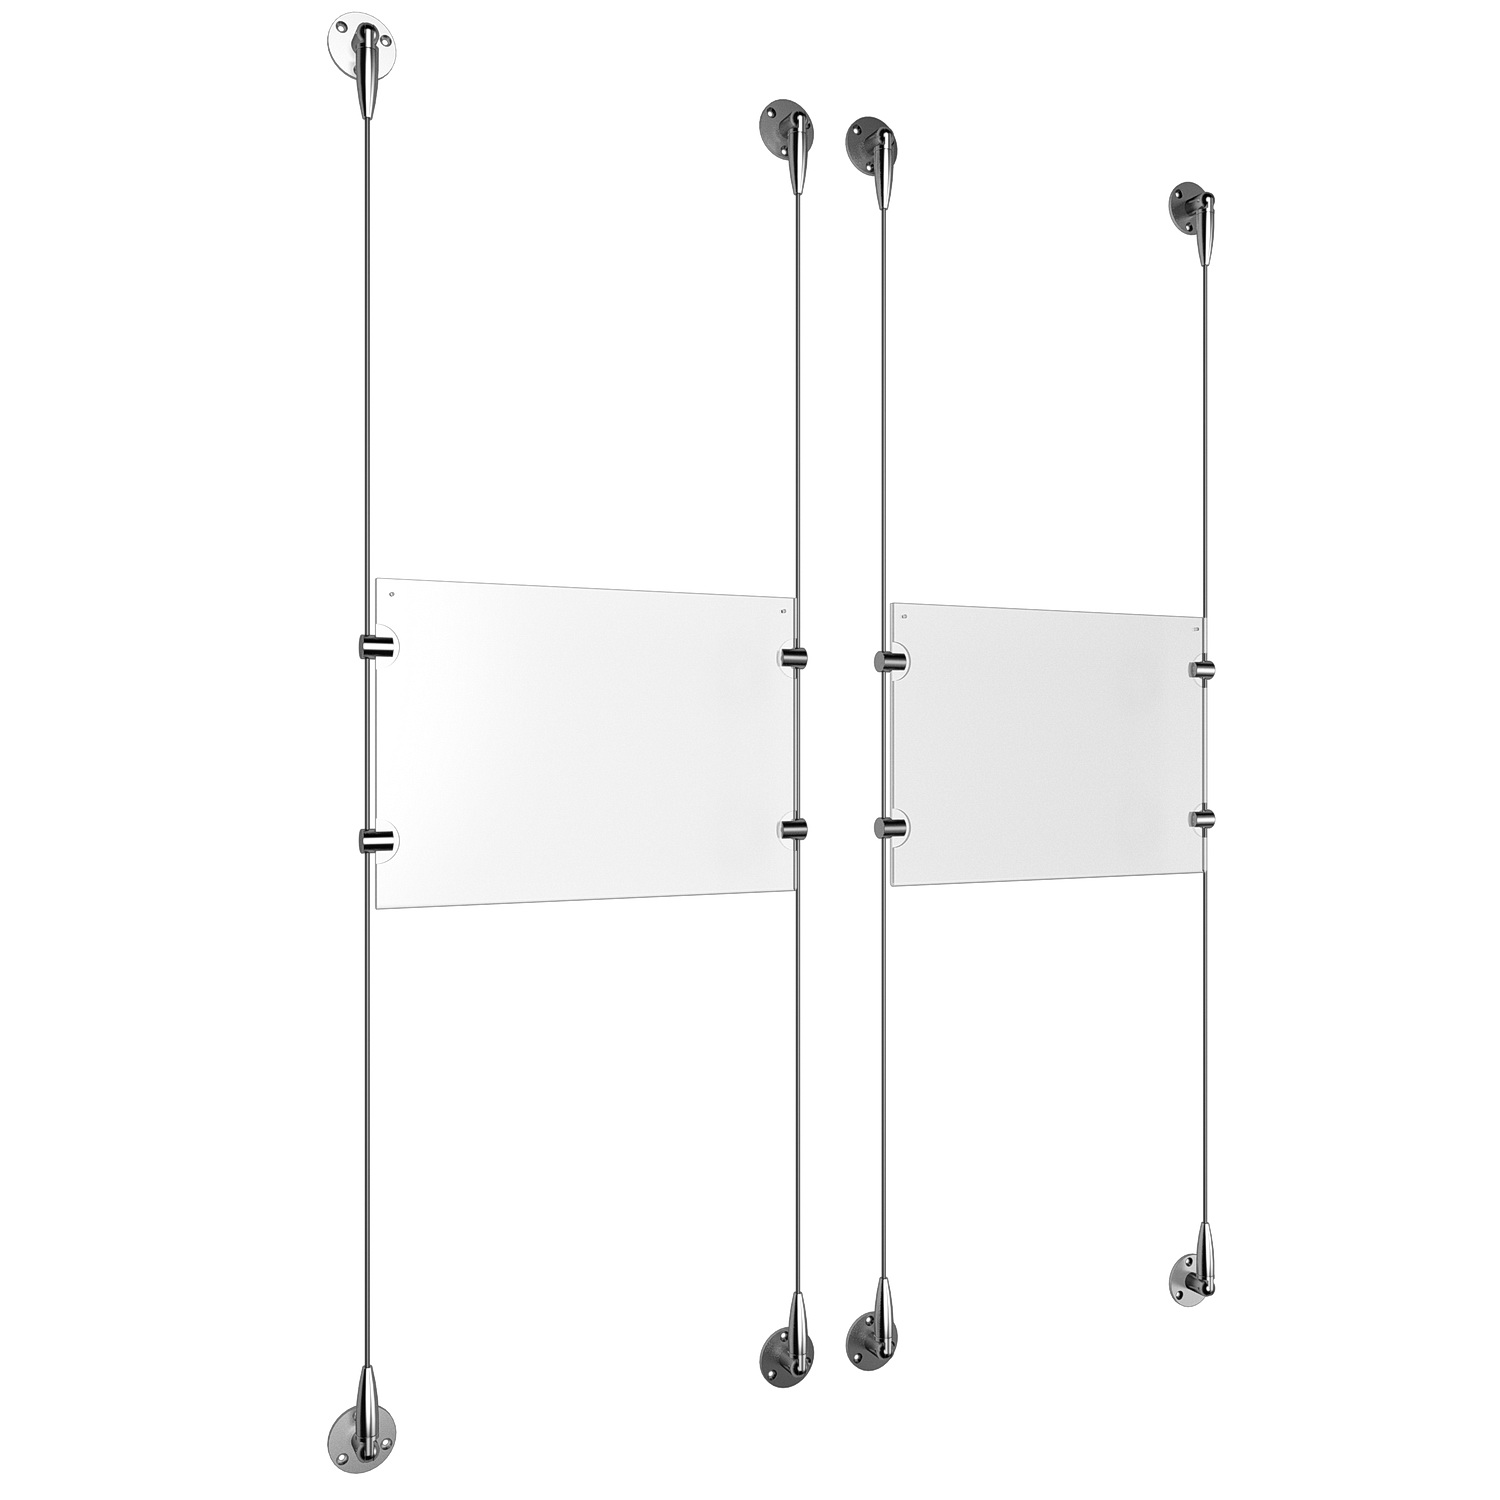 (2) 11'' Width x 8-1/2'' Height Clear Acrylic Frame & (4) Stainless Steel Satin Brushed Adjustable Angle Signature 1/8'' Cable Systems with (8) Single-Sided Panel Grippers